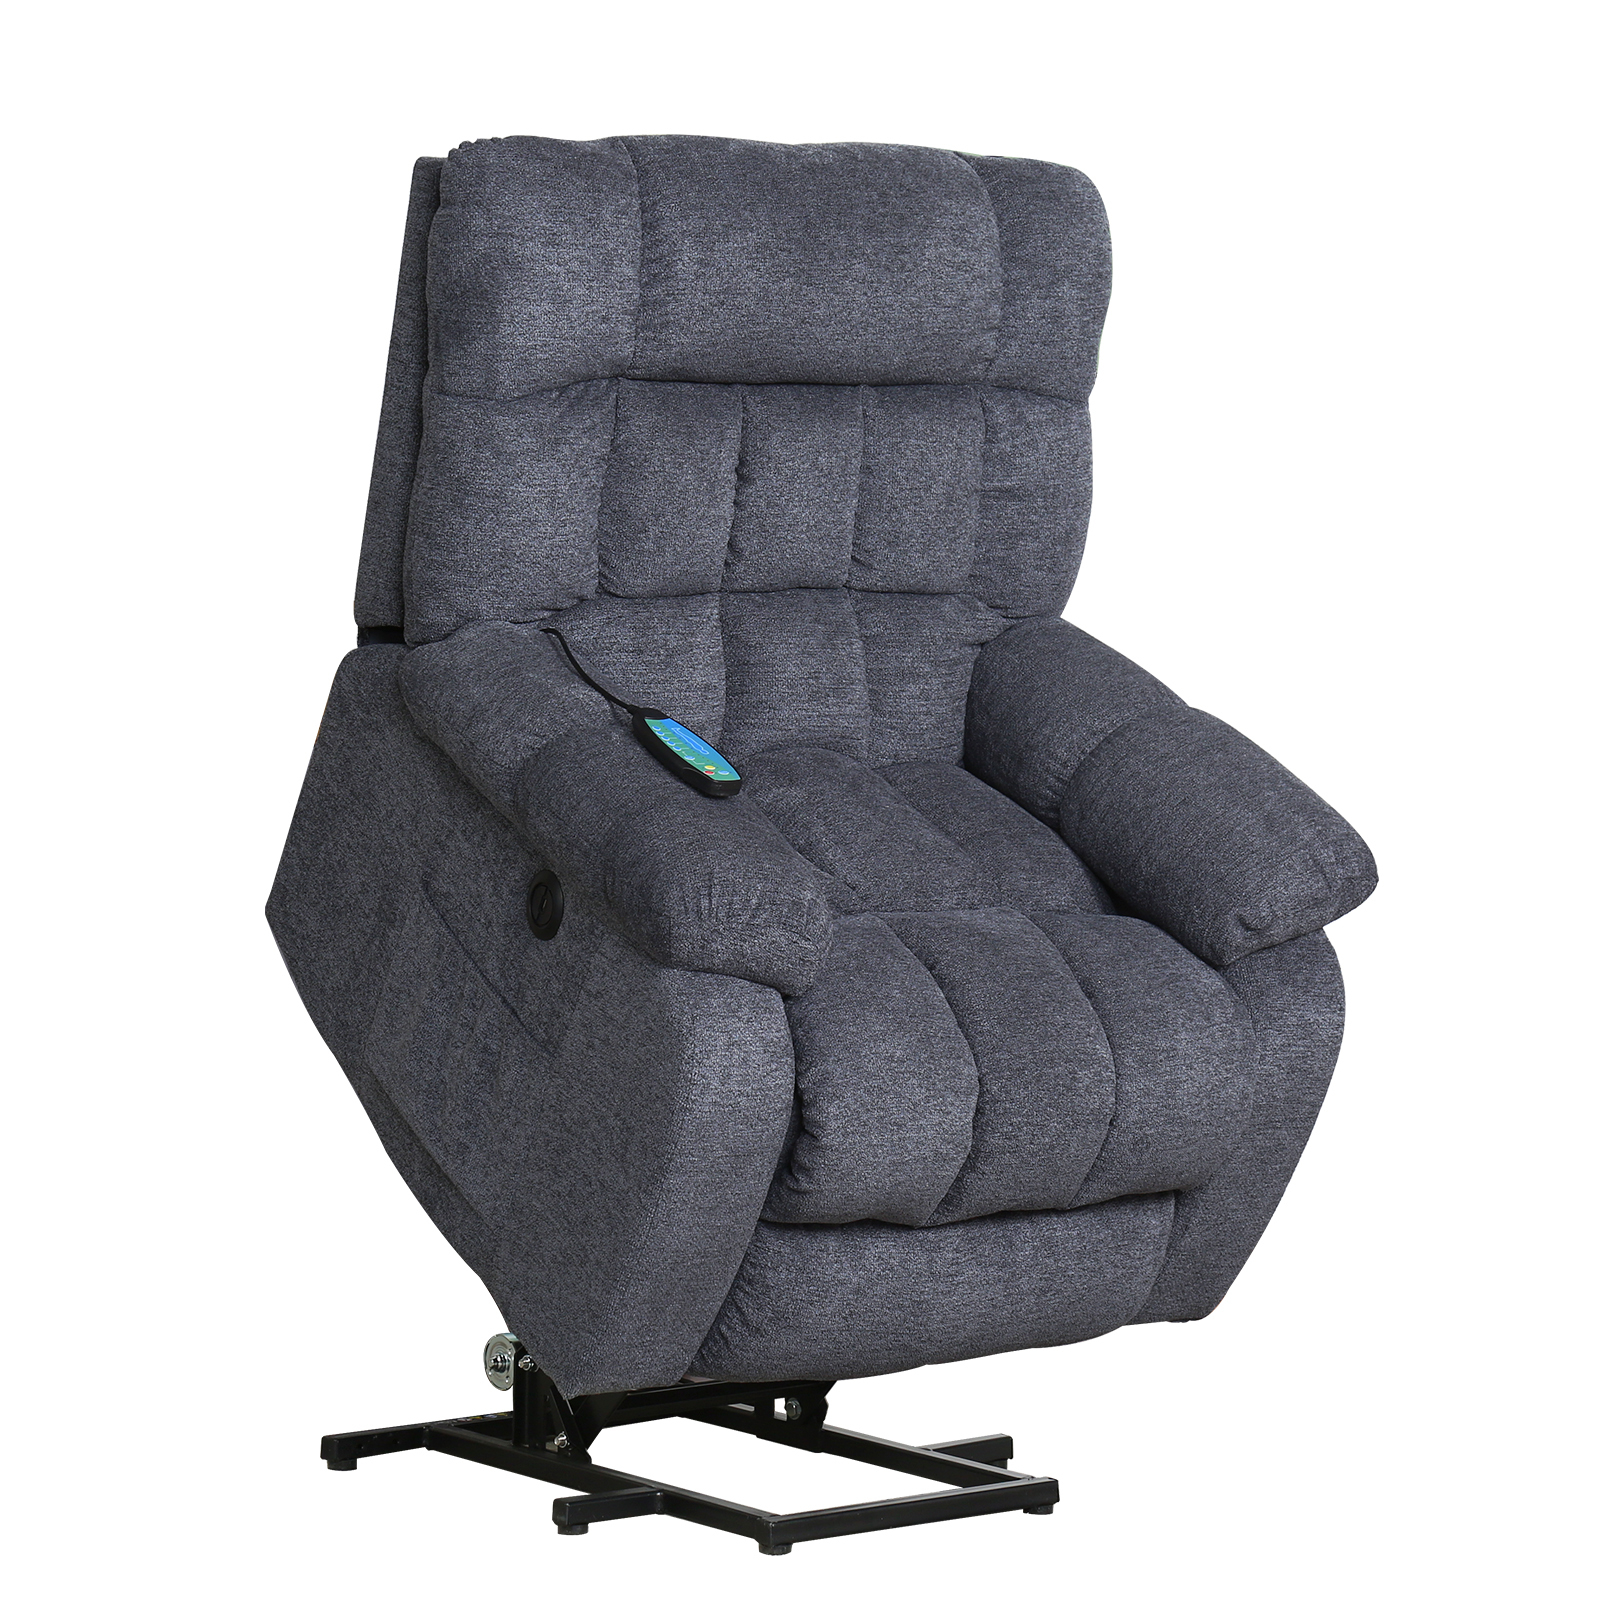 Electric lift recliner with heat therapy and massage, suitable for the elderly, heavy recliner, with modern padded arms and back, navy-Boyel Living